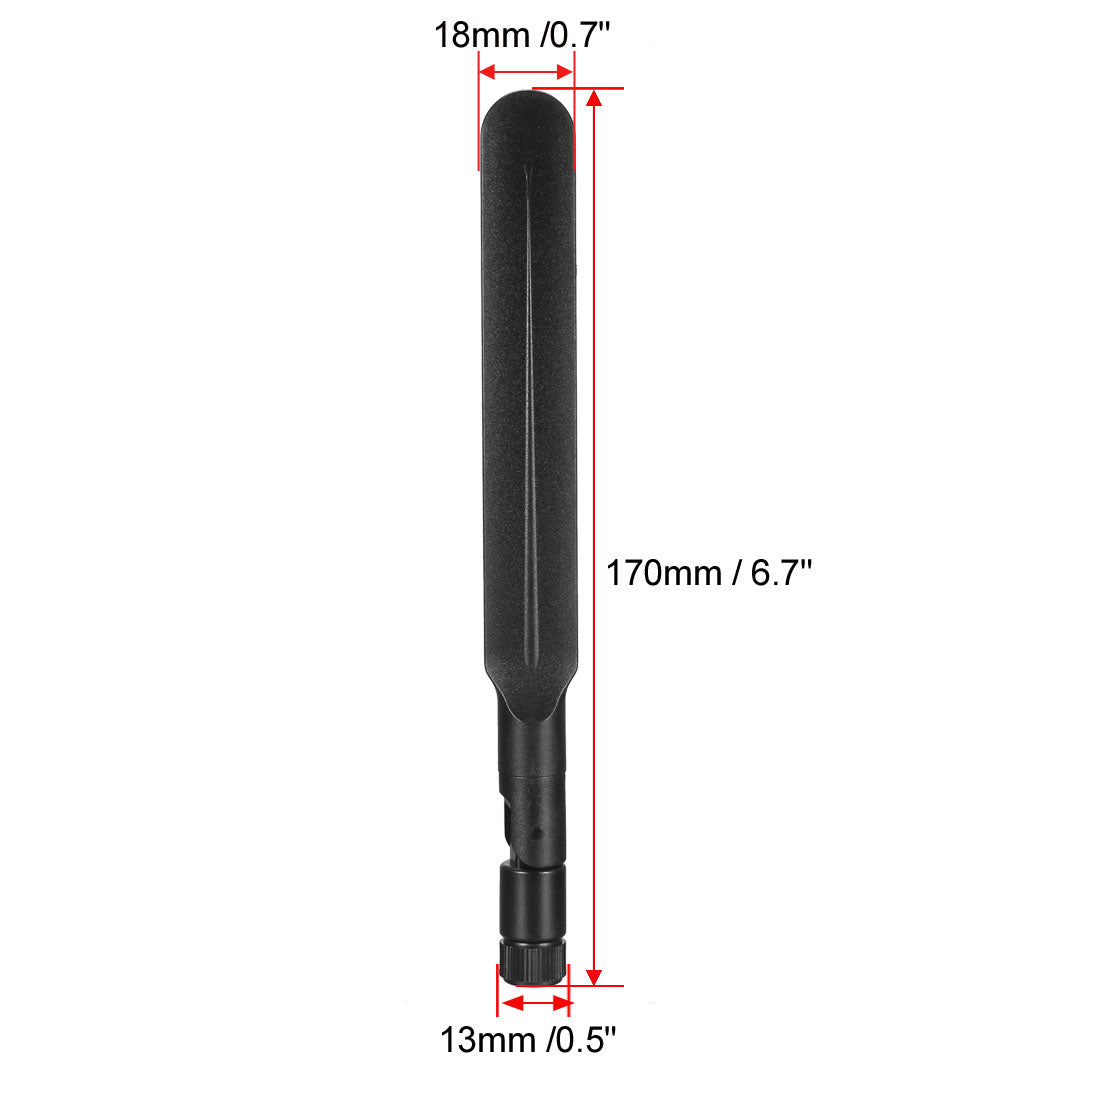 uxcell Uxcell GSM GPRS WCDMA LTE Antenna 3G 4G 9dBi High Gain 780-960/1710-2700MHz RP-SMA Male Connector Omni Direction Foldable Paddle Type